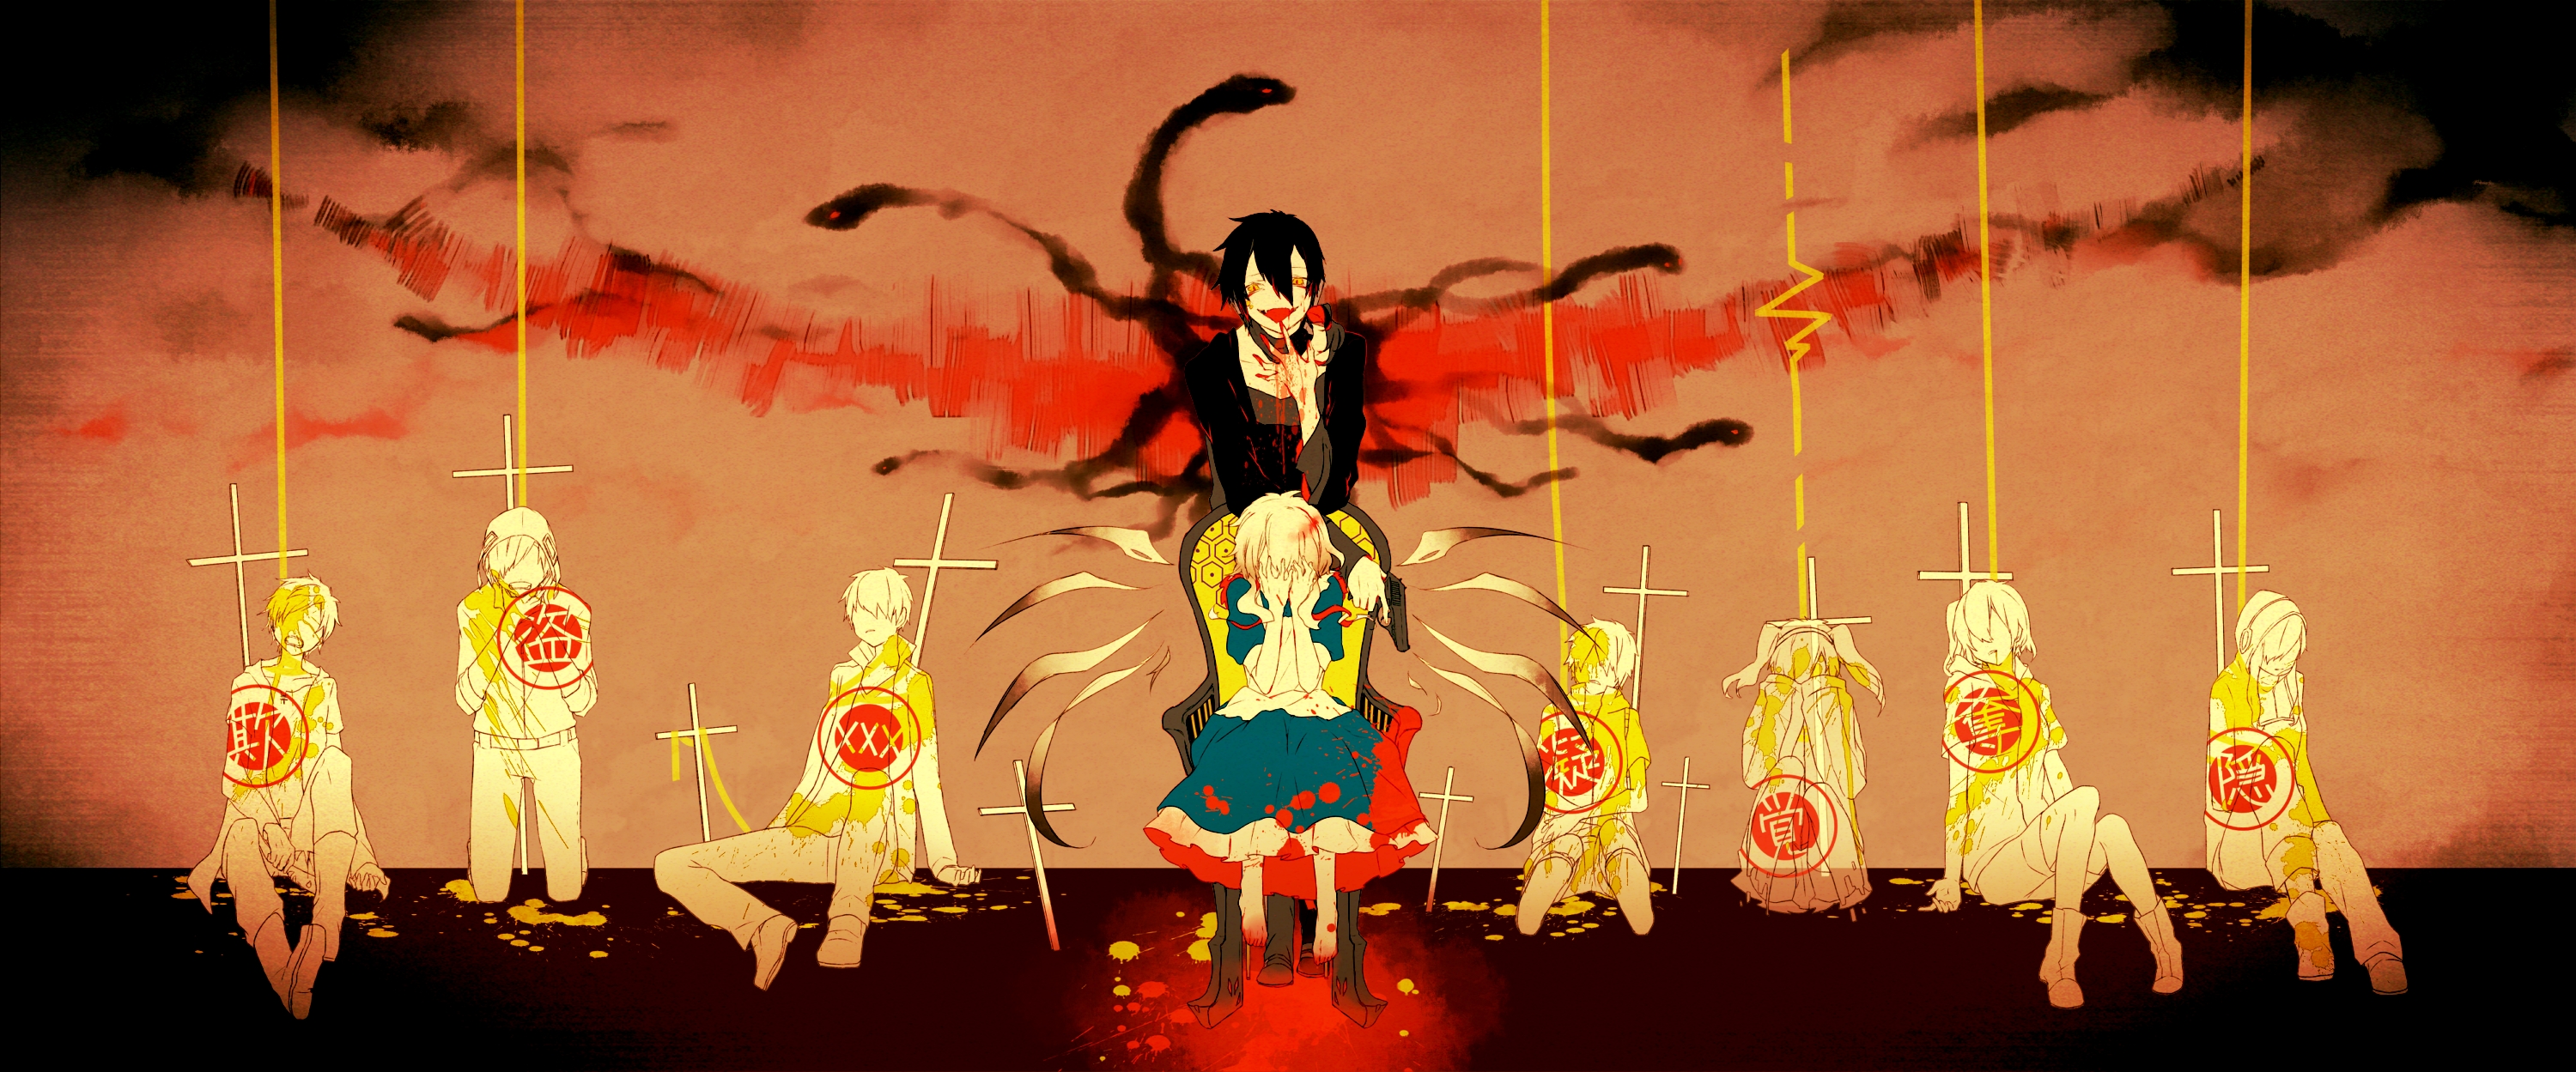 Anime Kagerou Project 3000x1249